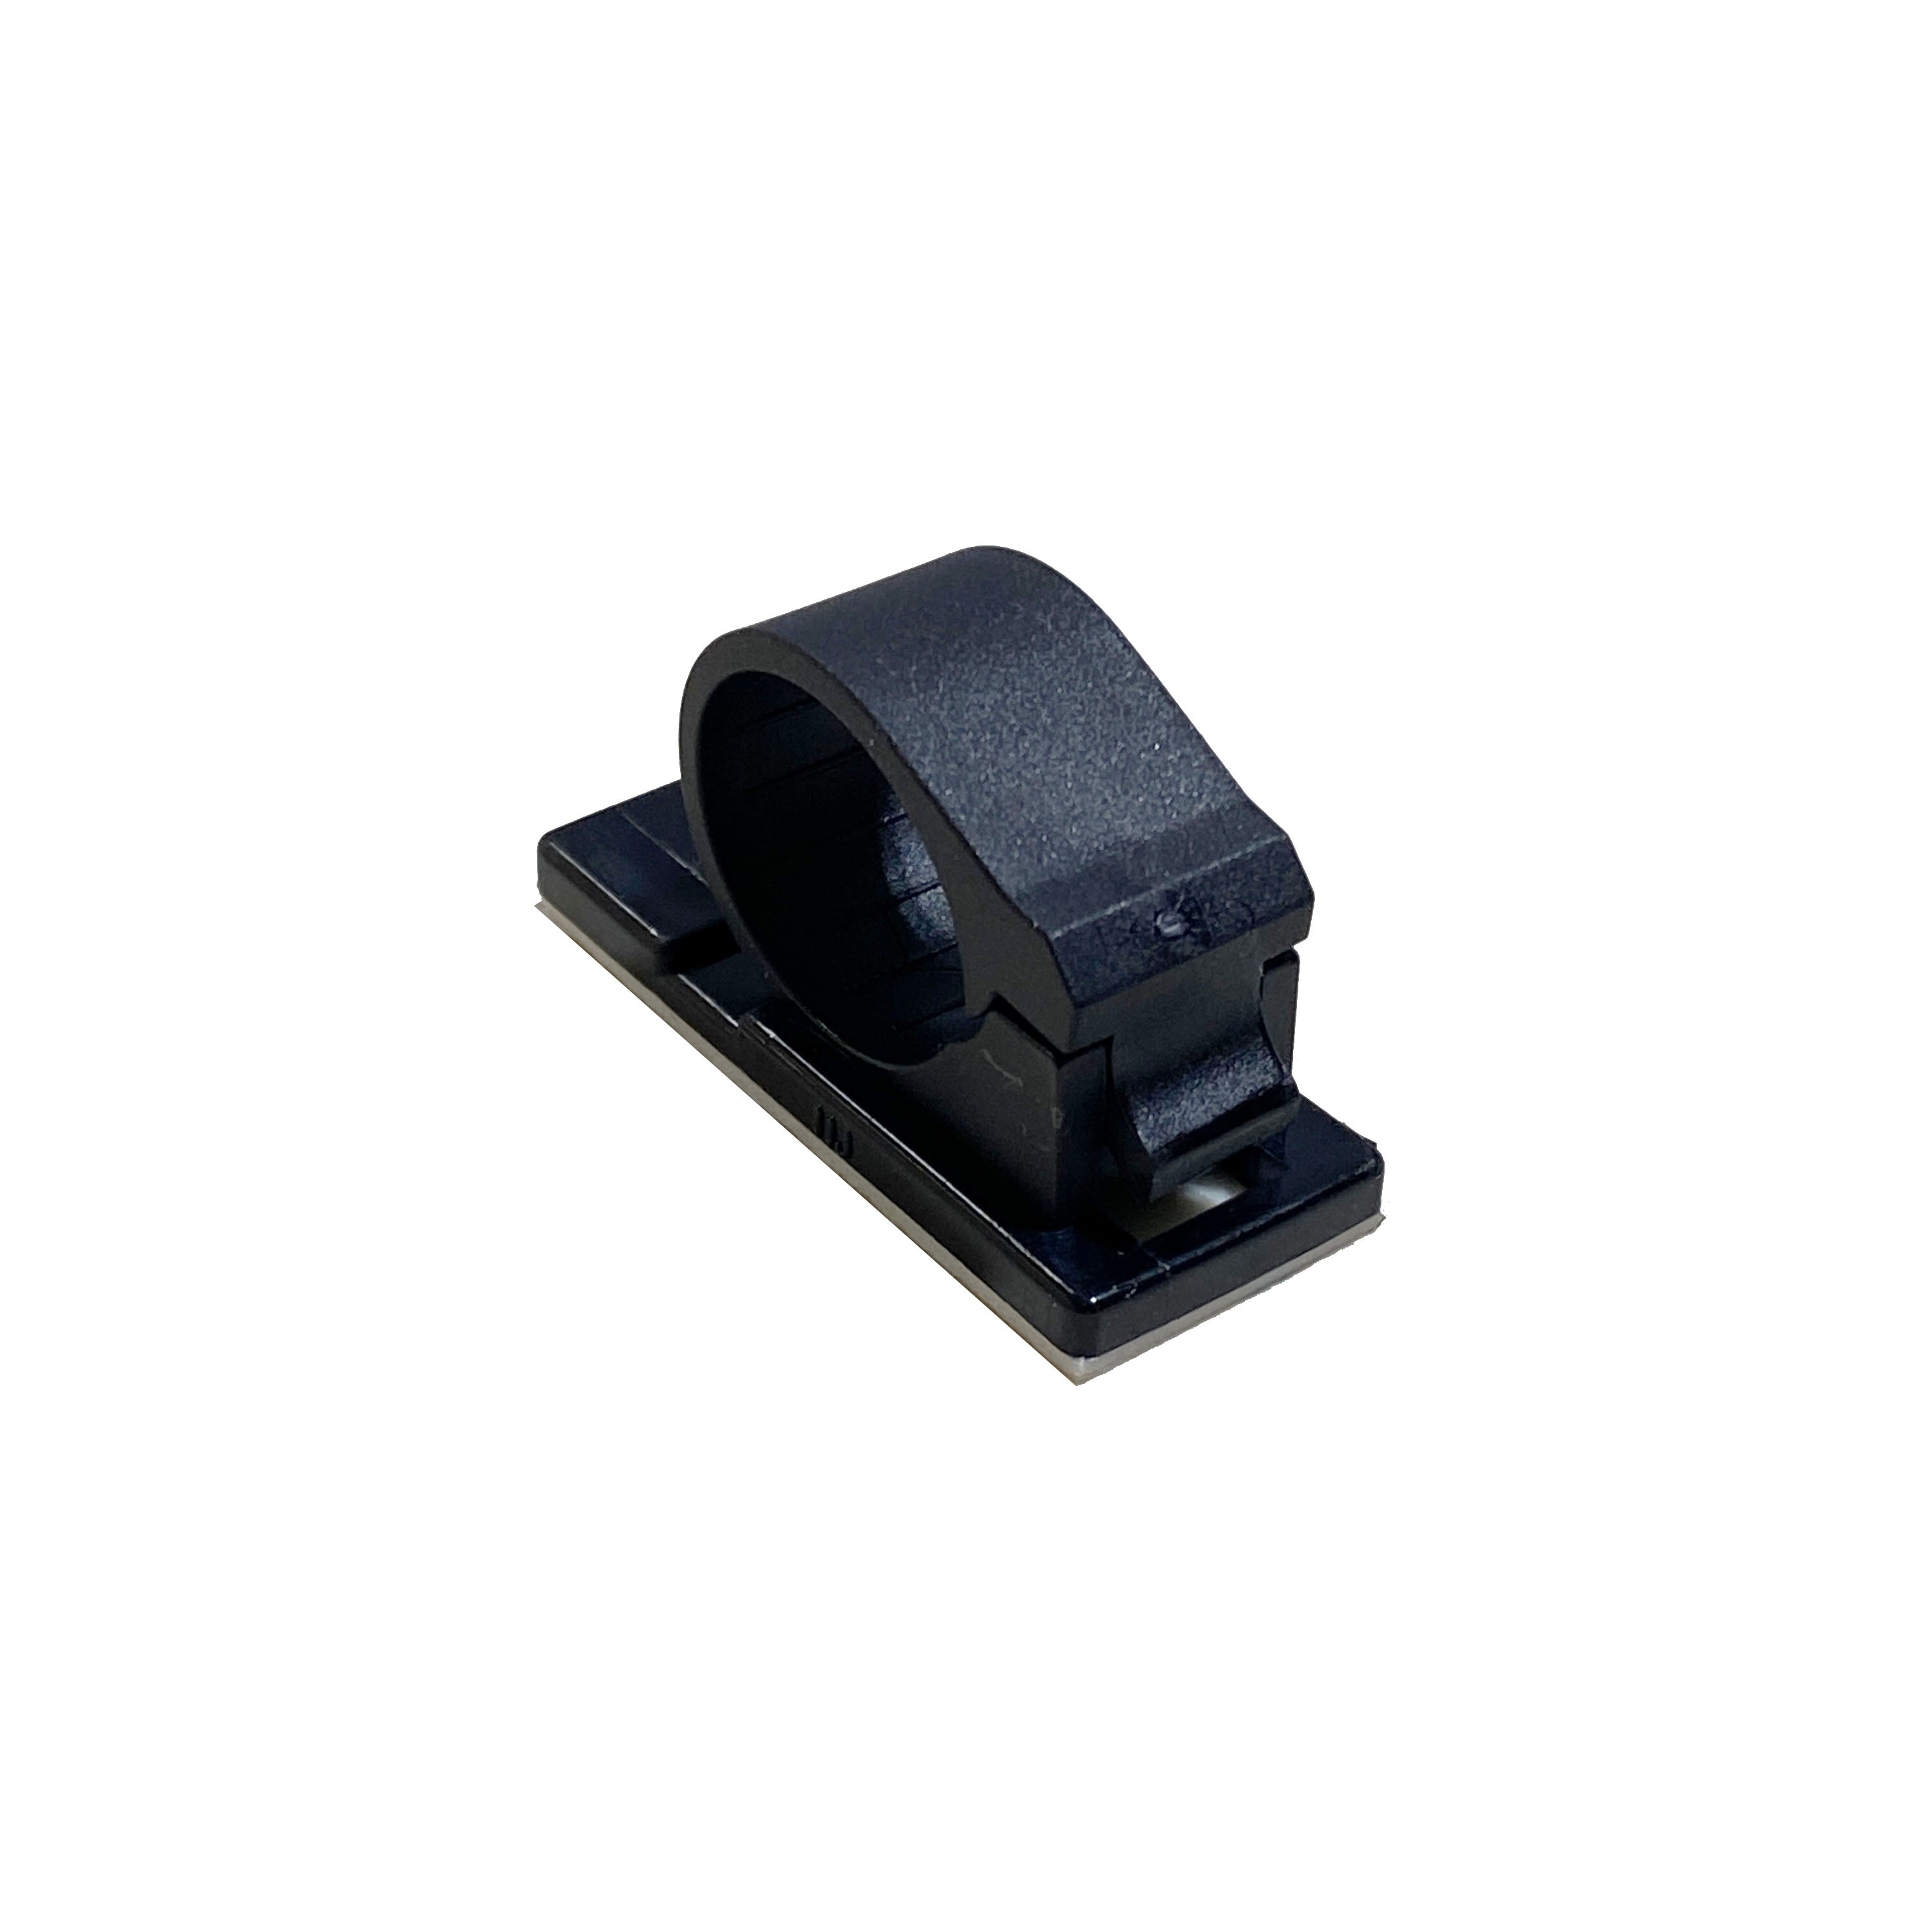 Adhesive Cable Clamp Mount